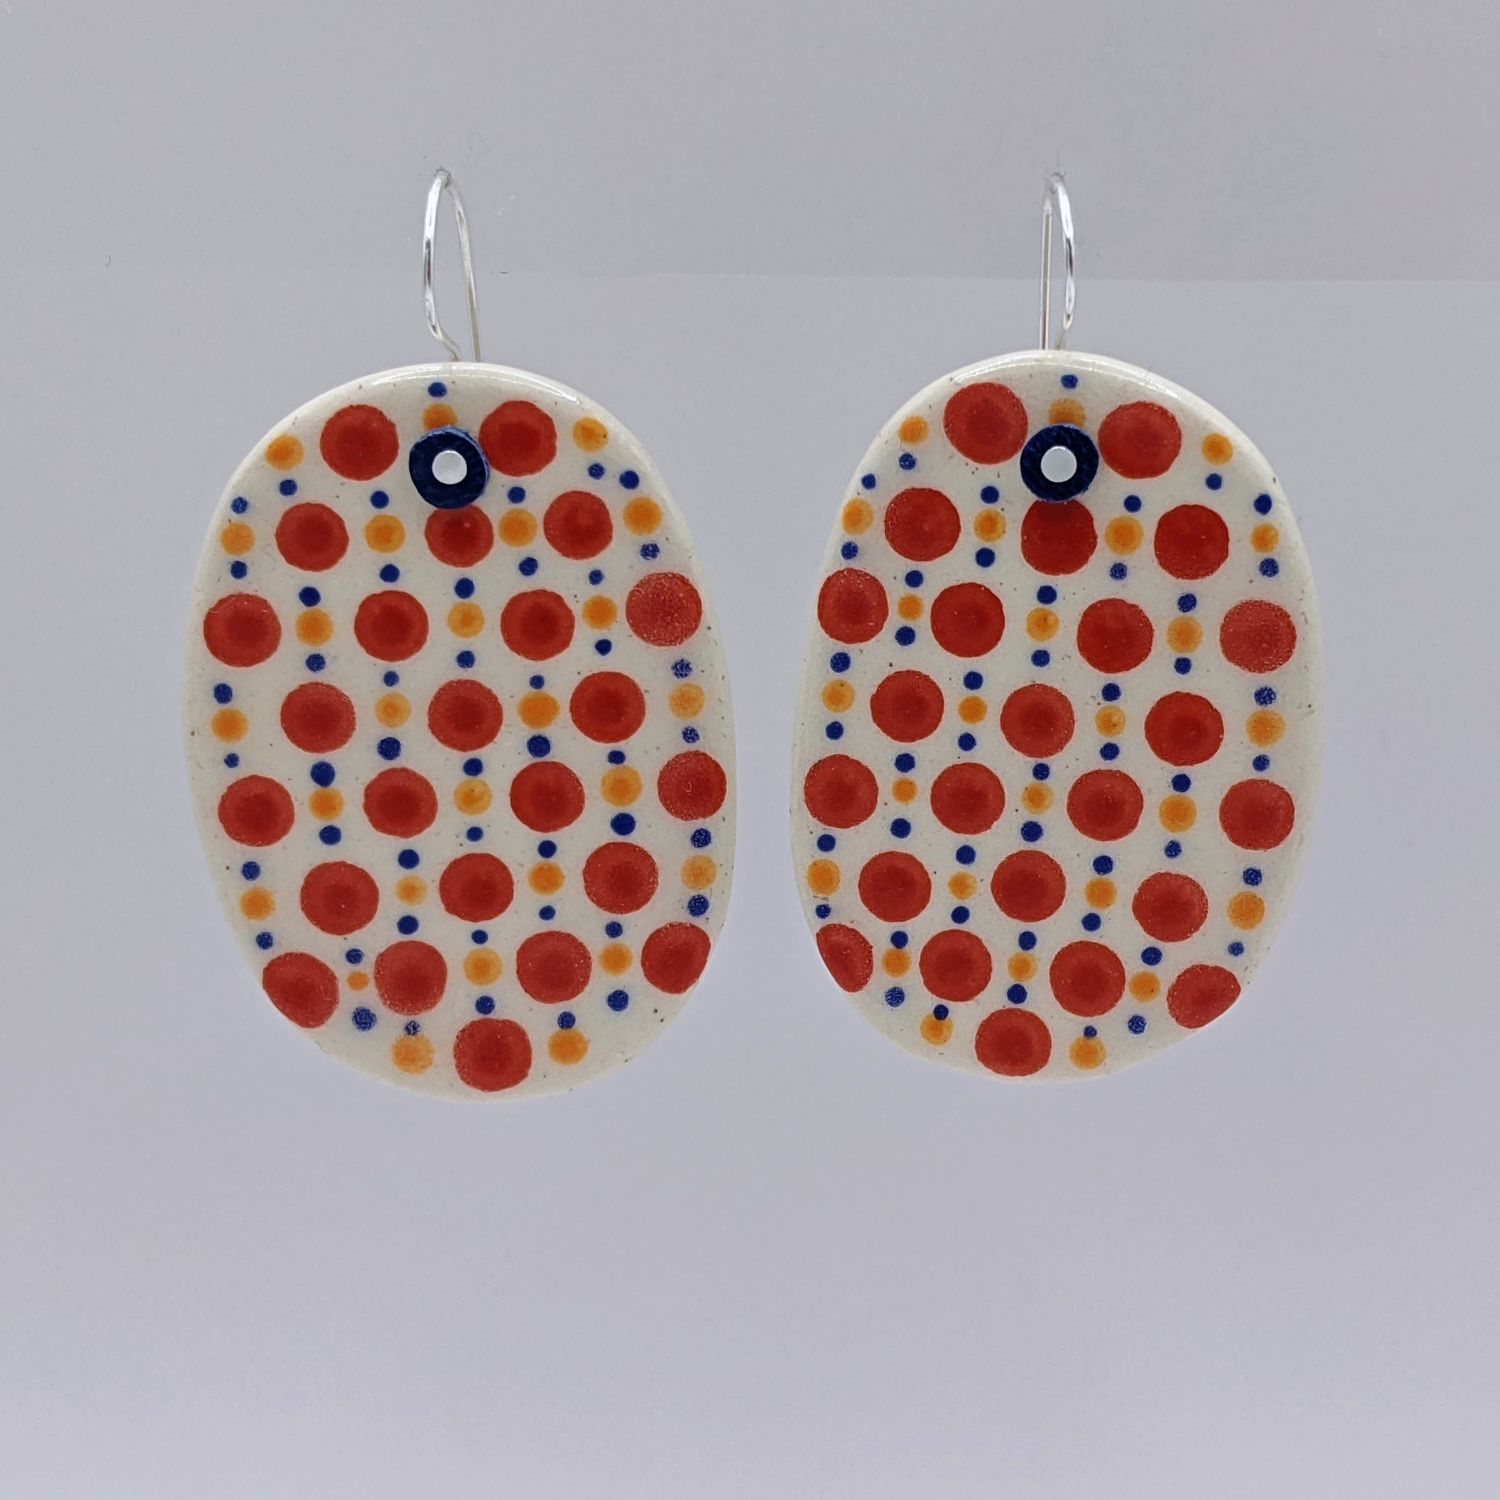 Here and Here: Red Dotted Ceramic Disc Earrings Product Image 1 of 3